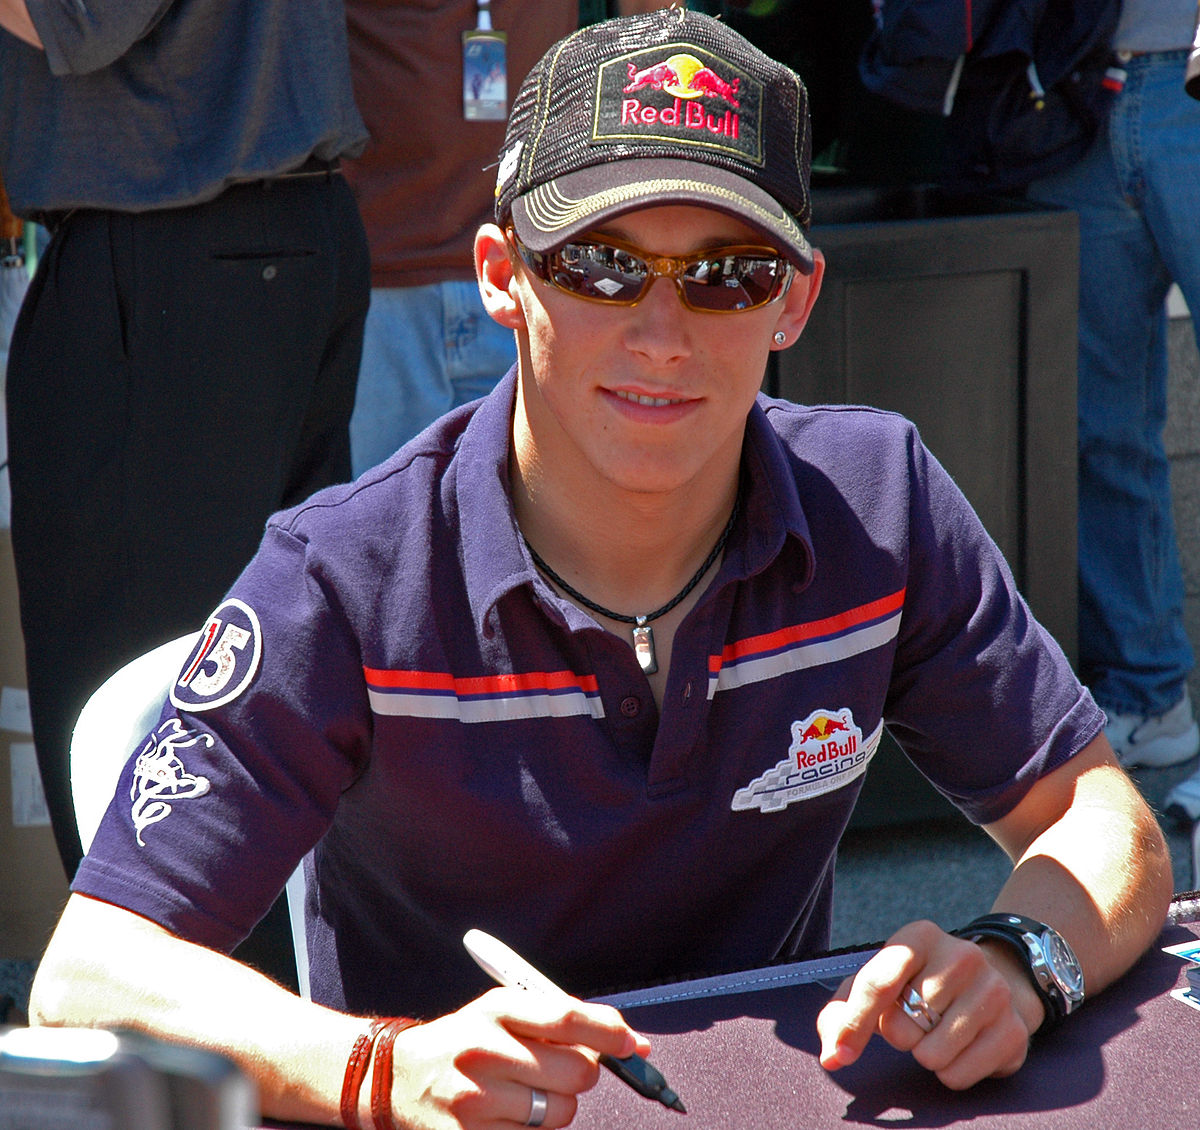 Race News: Christian Klien the professional Honda driver accept and sign 99.7 million for a contract due to… read more